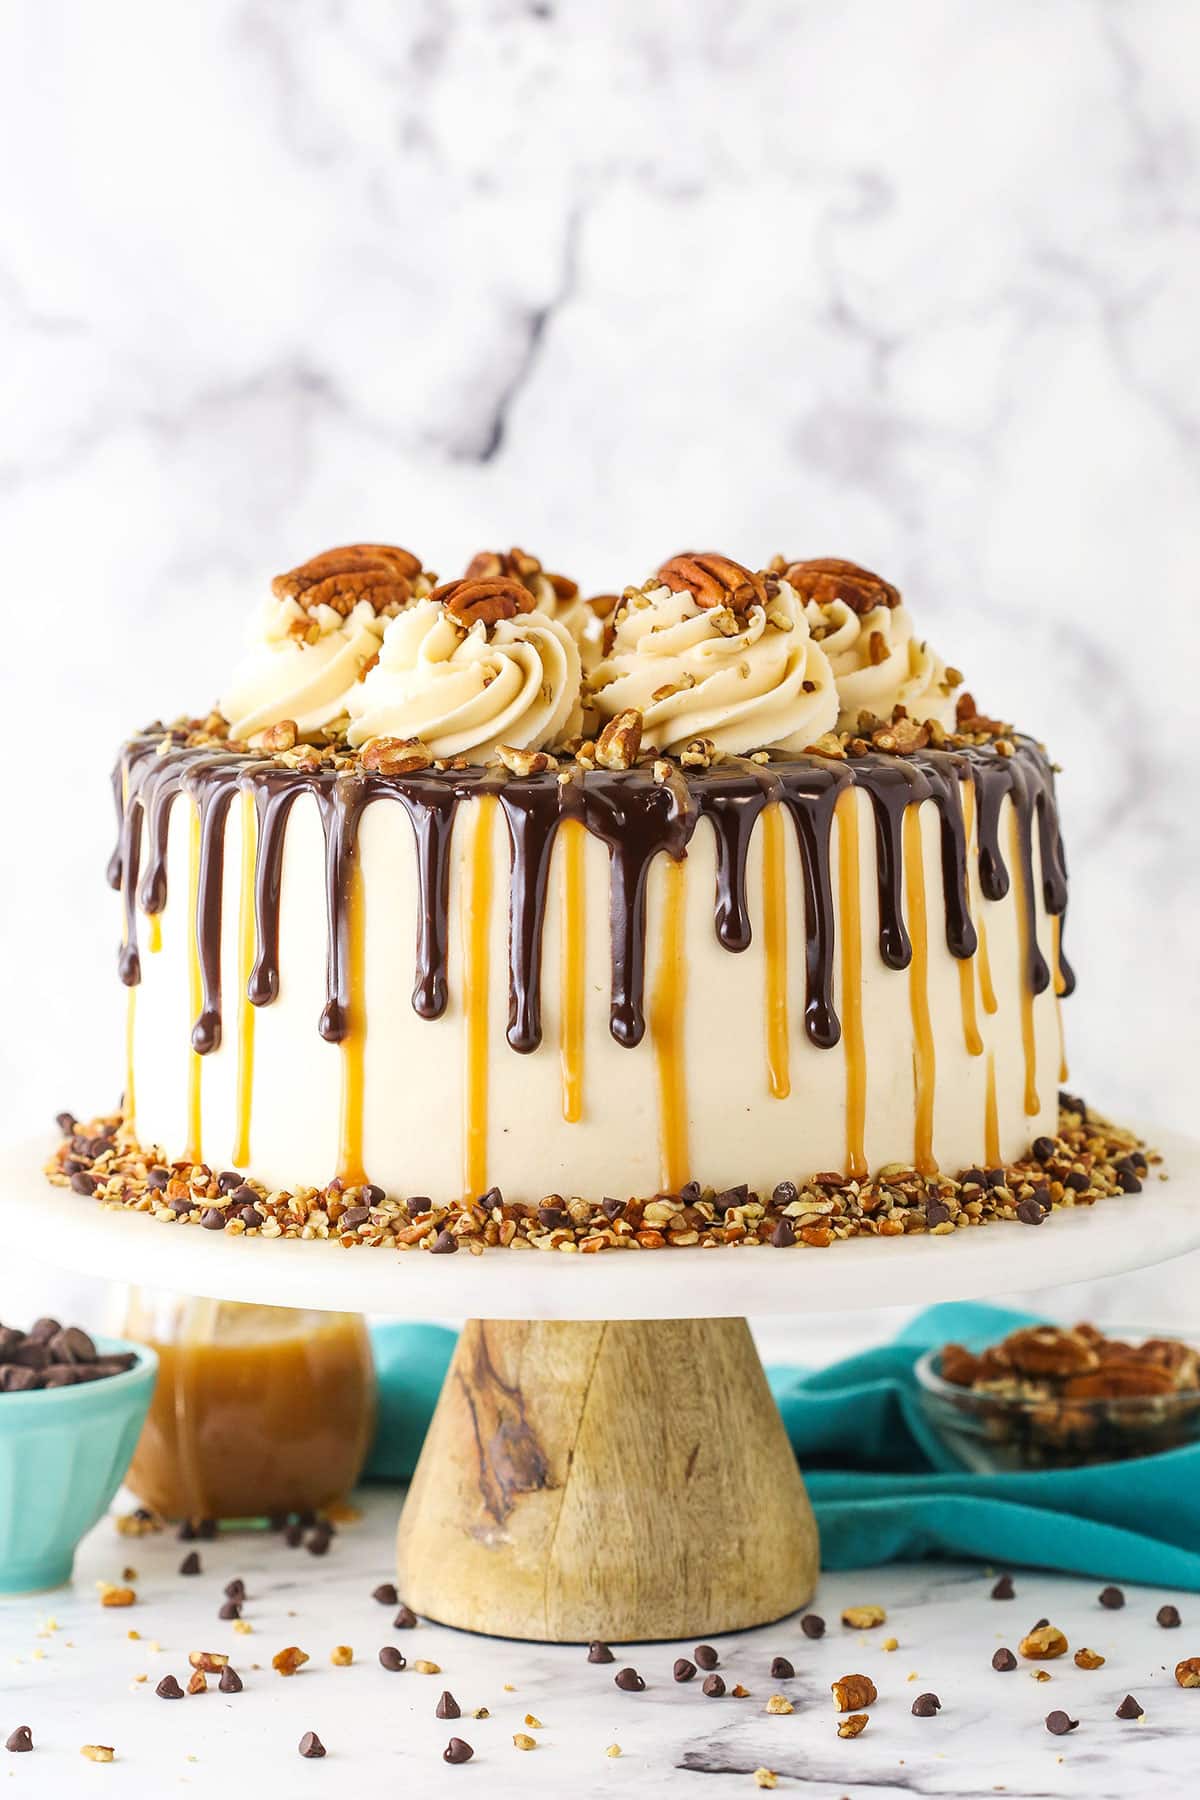 Banana Cake (with Salted Caramel Frosting) - Cooking Classy